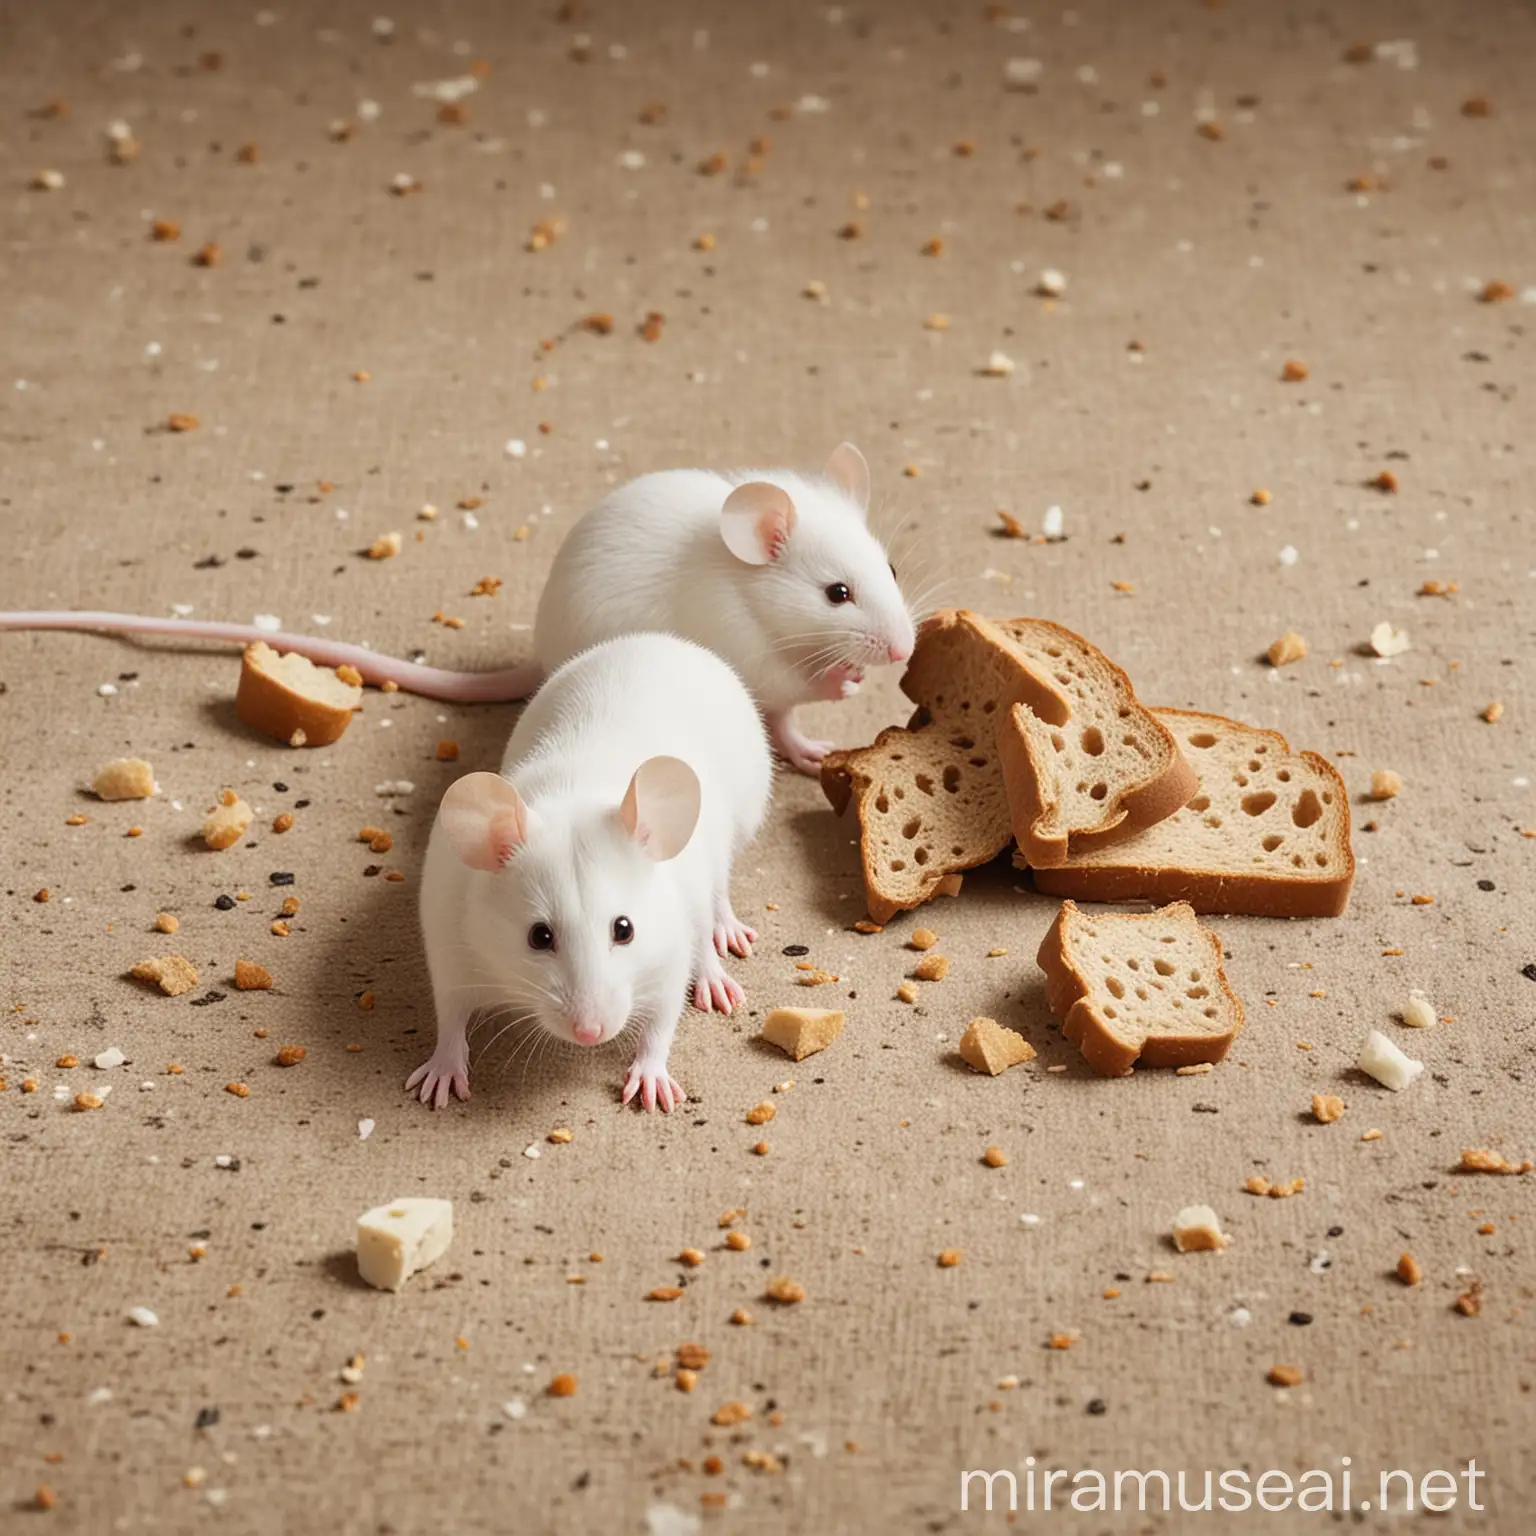 Two White Mice Eating Bread in Natural Daylight